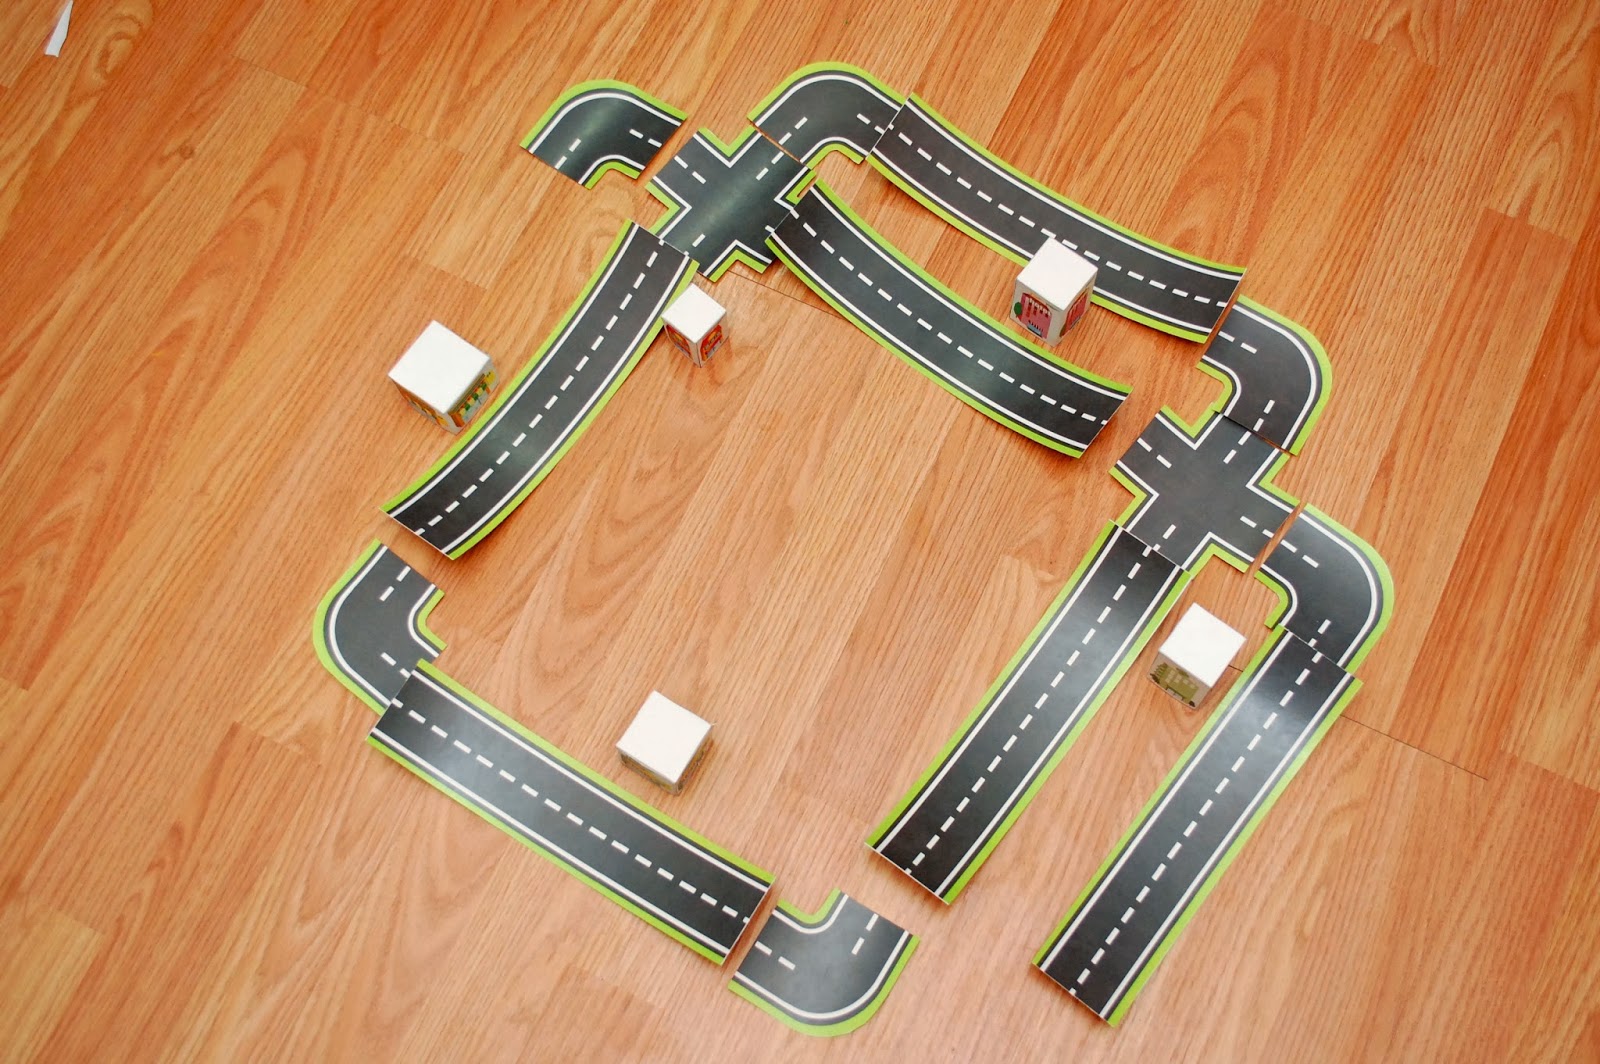 Printable Roads for Kids' Toy Cars So Here's My Life...